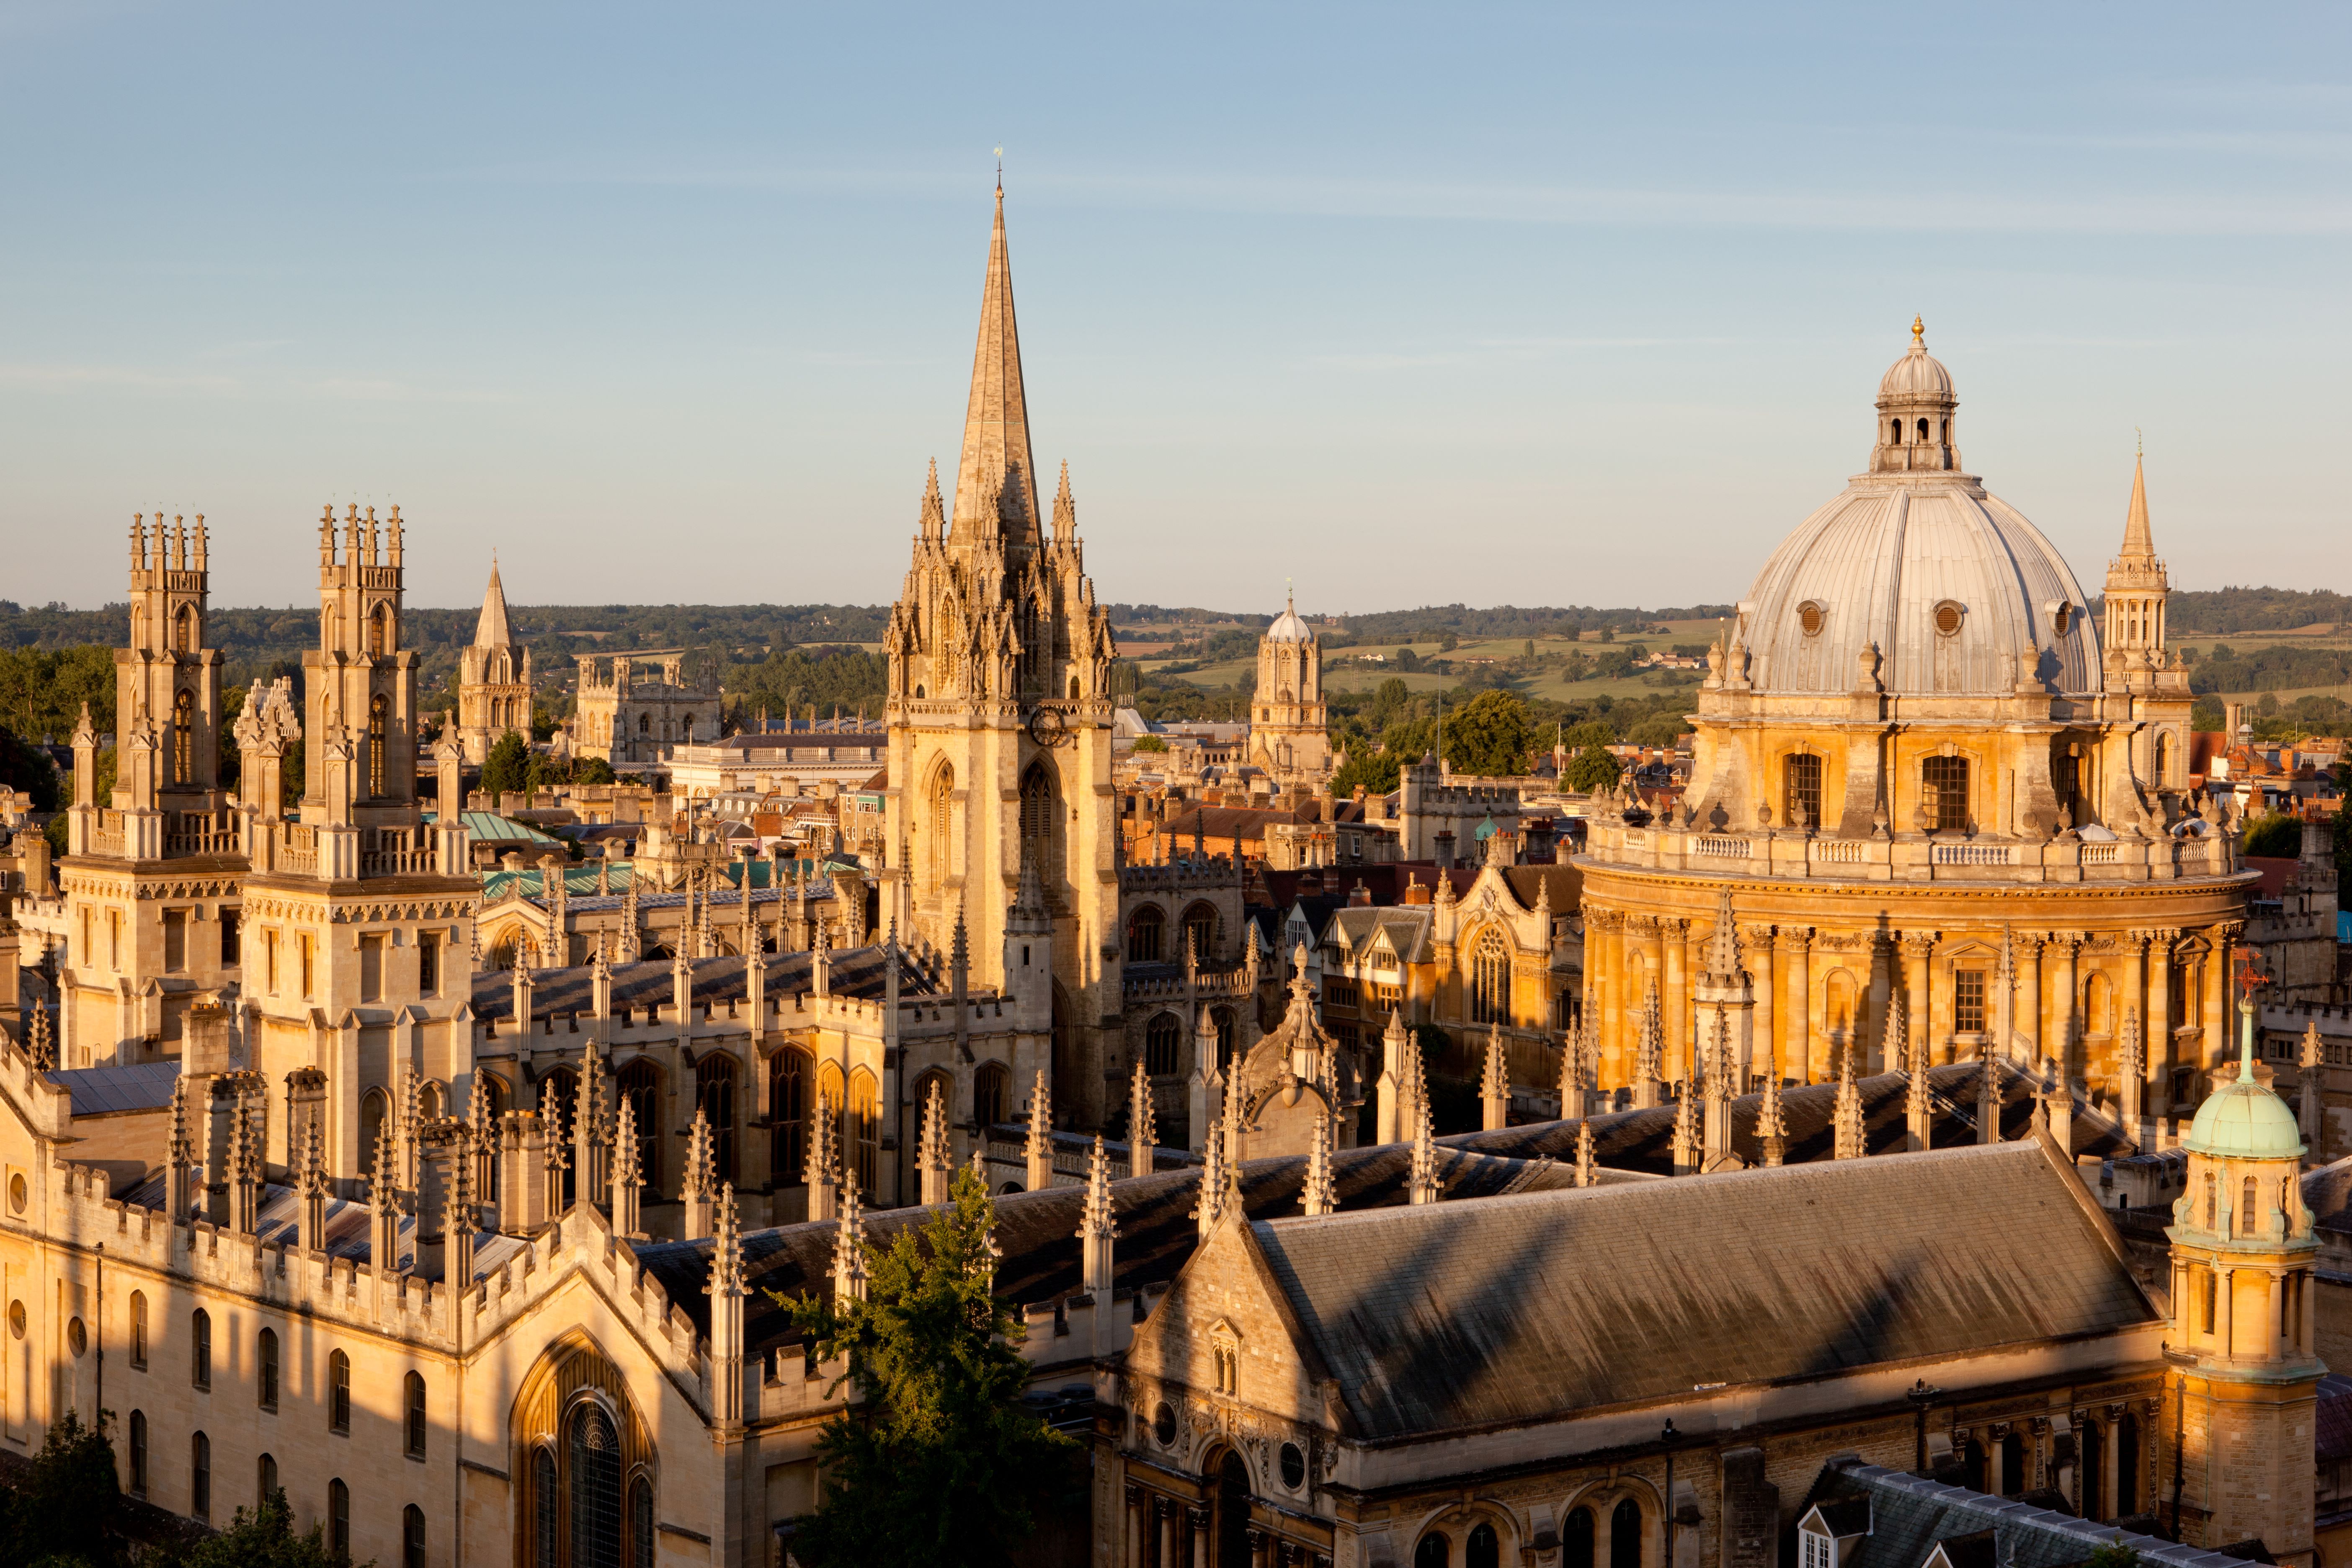 Oxford University named world's top university for the 7th